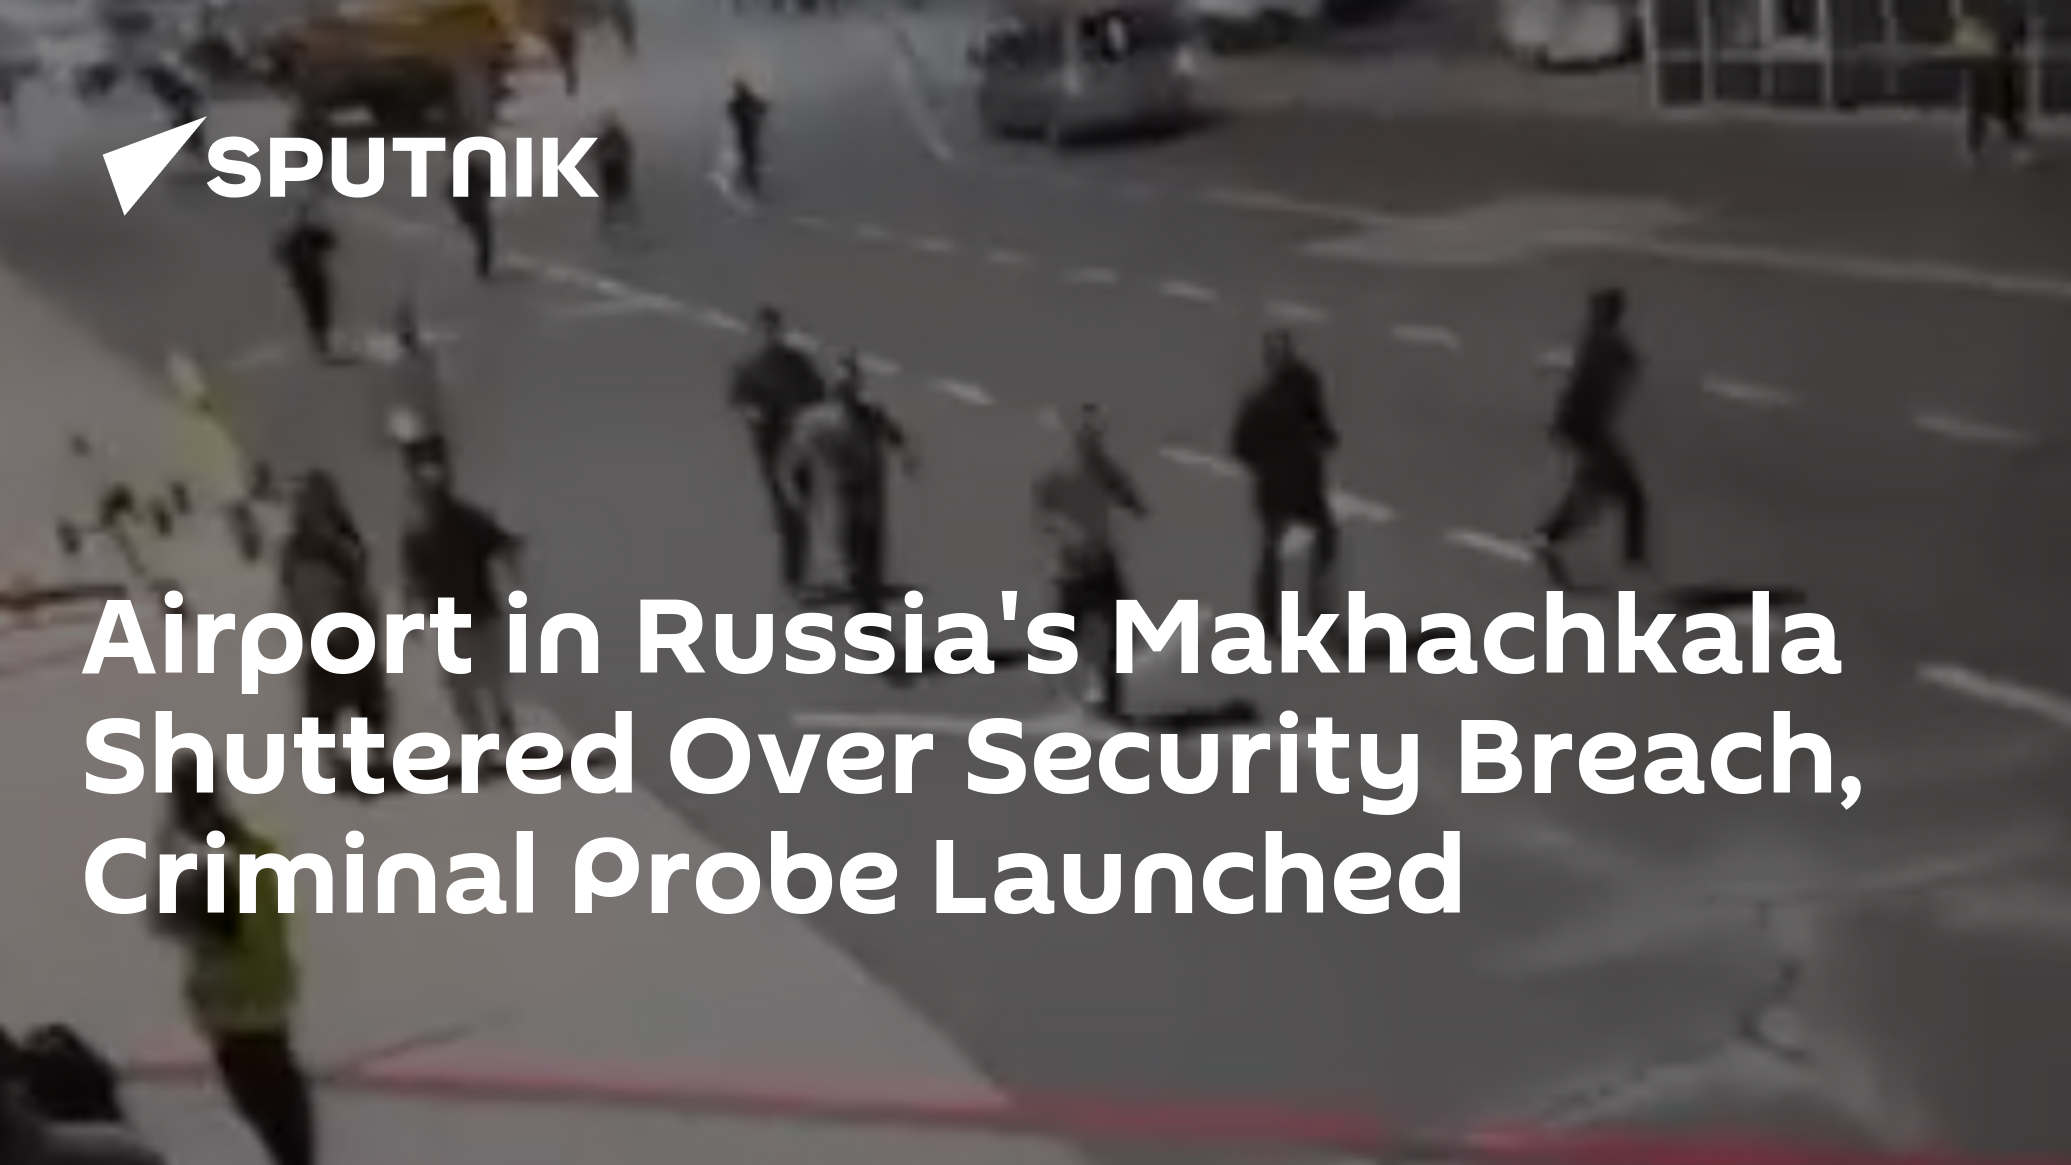 Airport in Russia's Makhachkala Shuttered Over Security Breach, Criminal Probe Launched